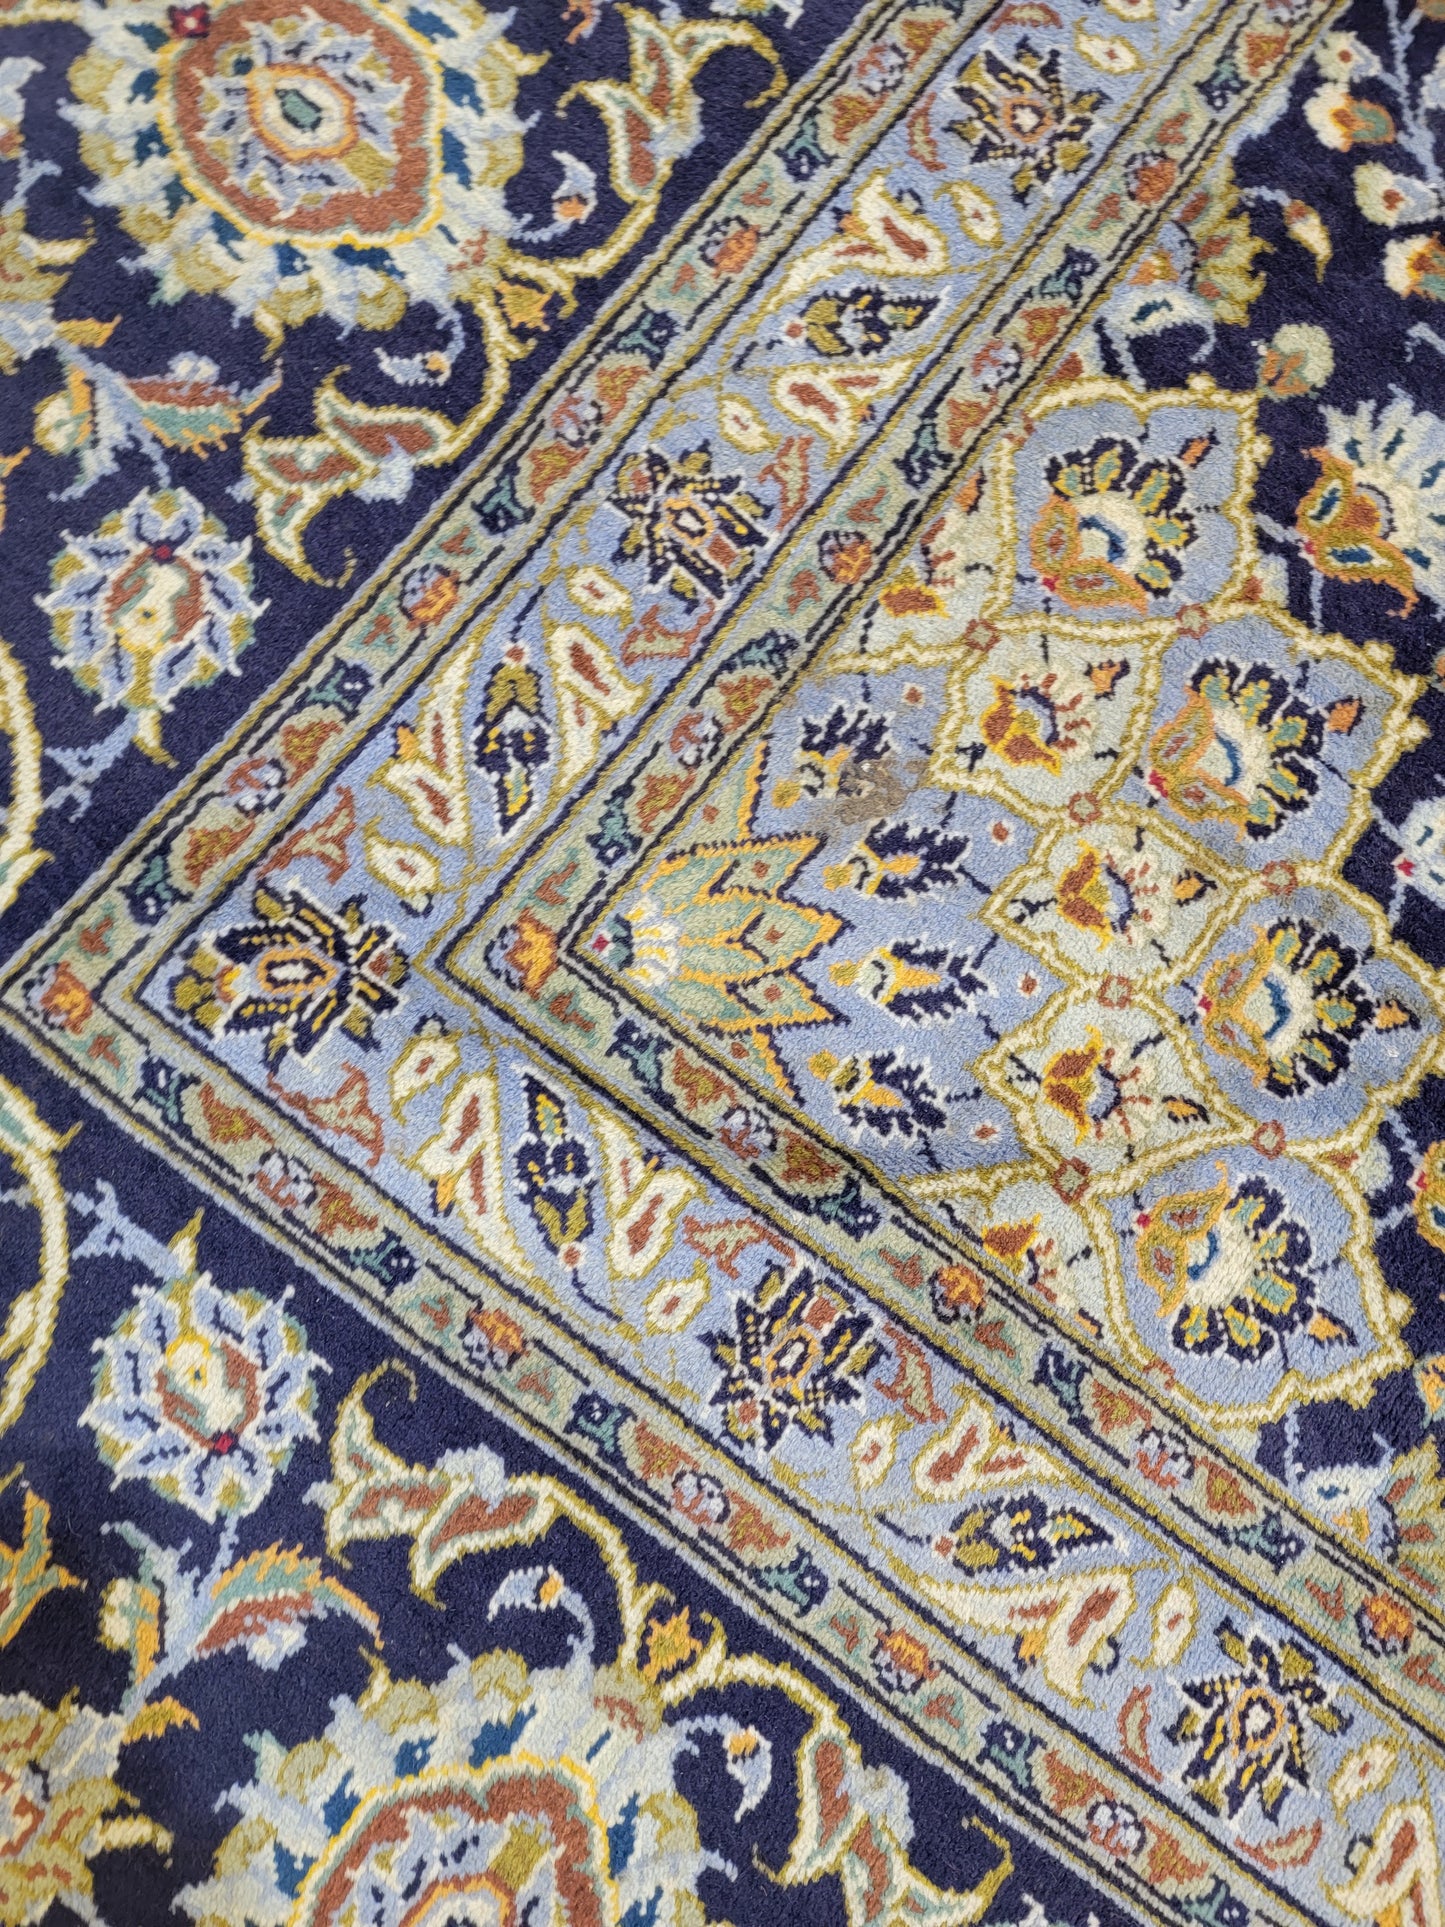 Antique Hand-Knotted Wool Area Rug Kashan Signed Rug 10'2" x 15'10"